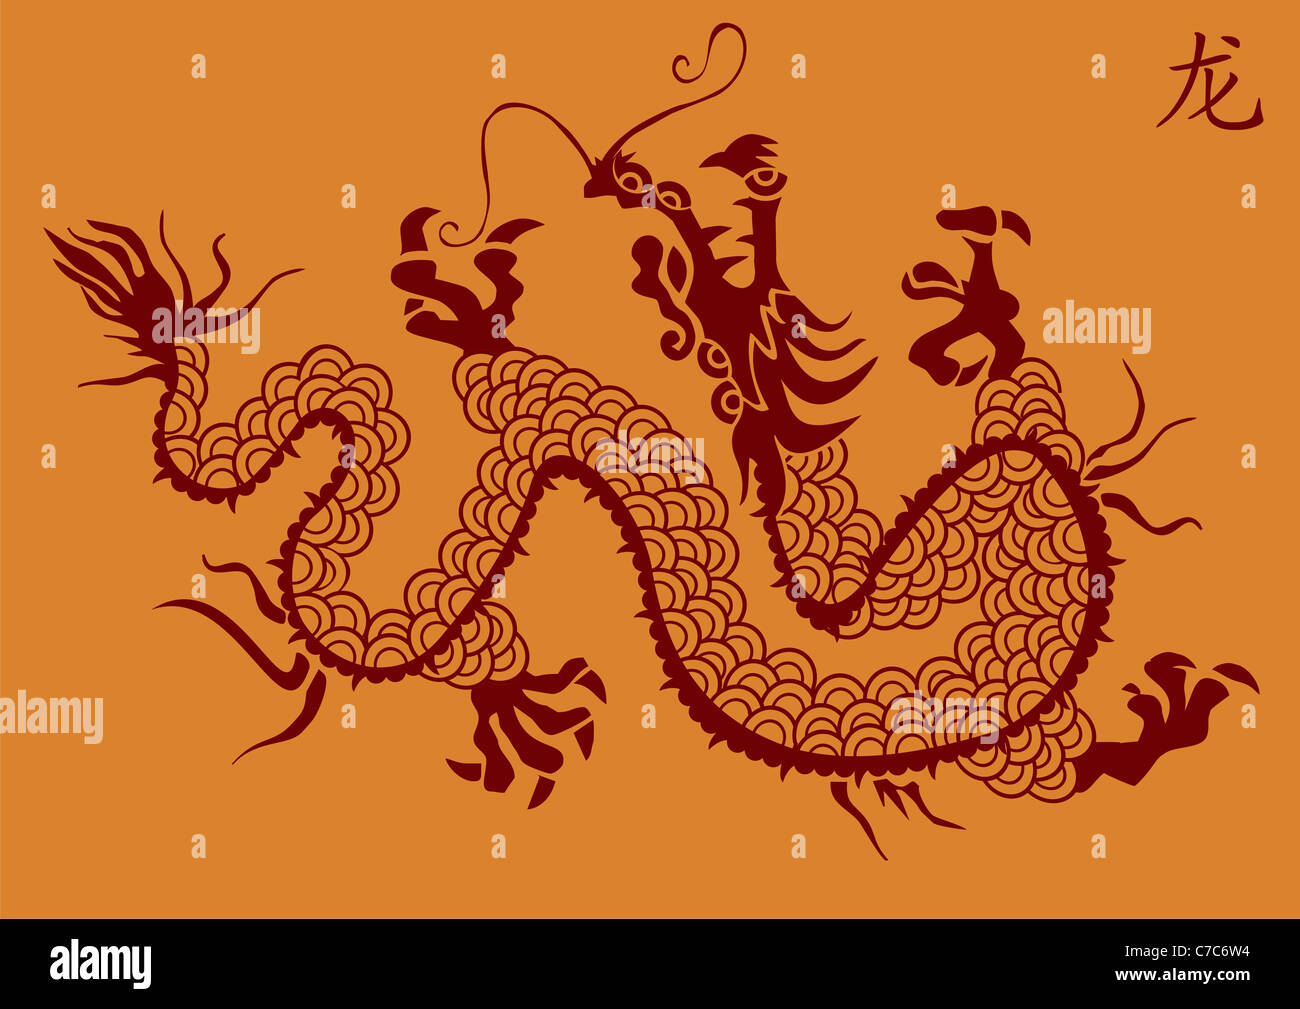 Illustration of ancient chinese dragon silhouette on orange background.  Stock Photo